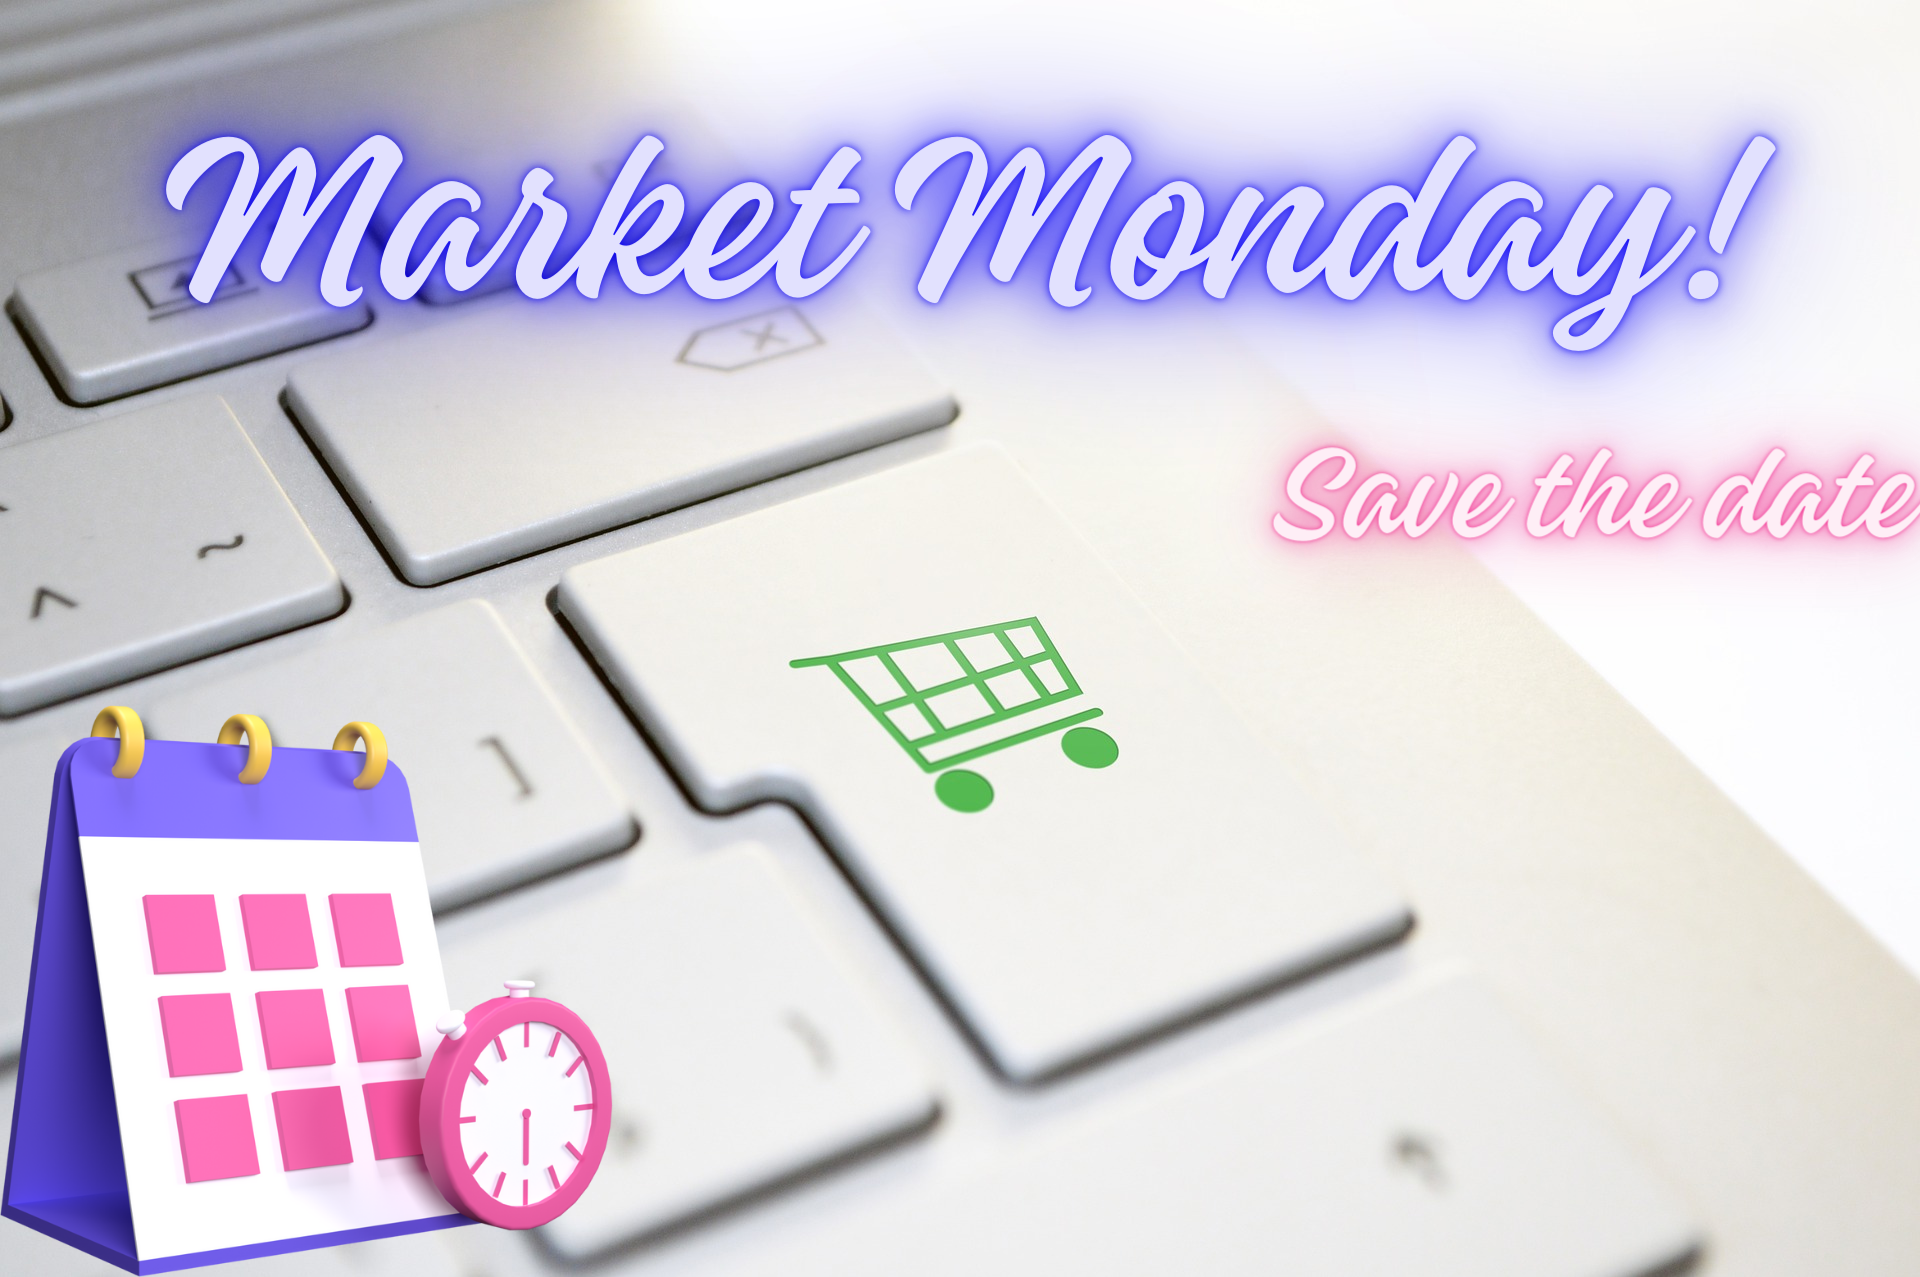 Market Monday - South Africans in Germany page